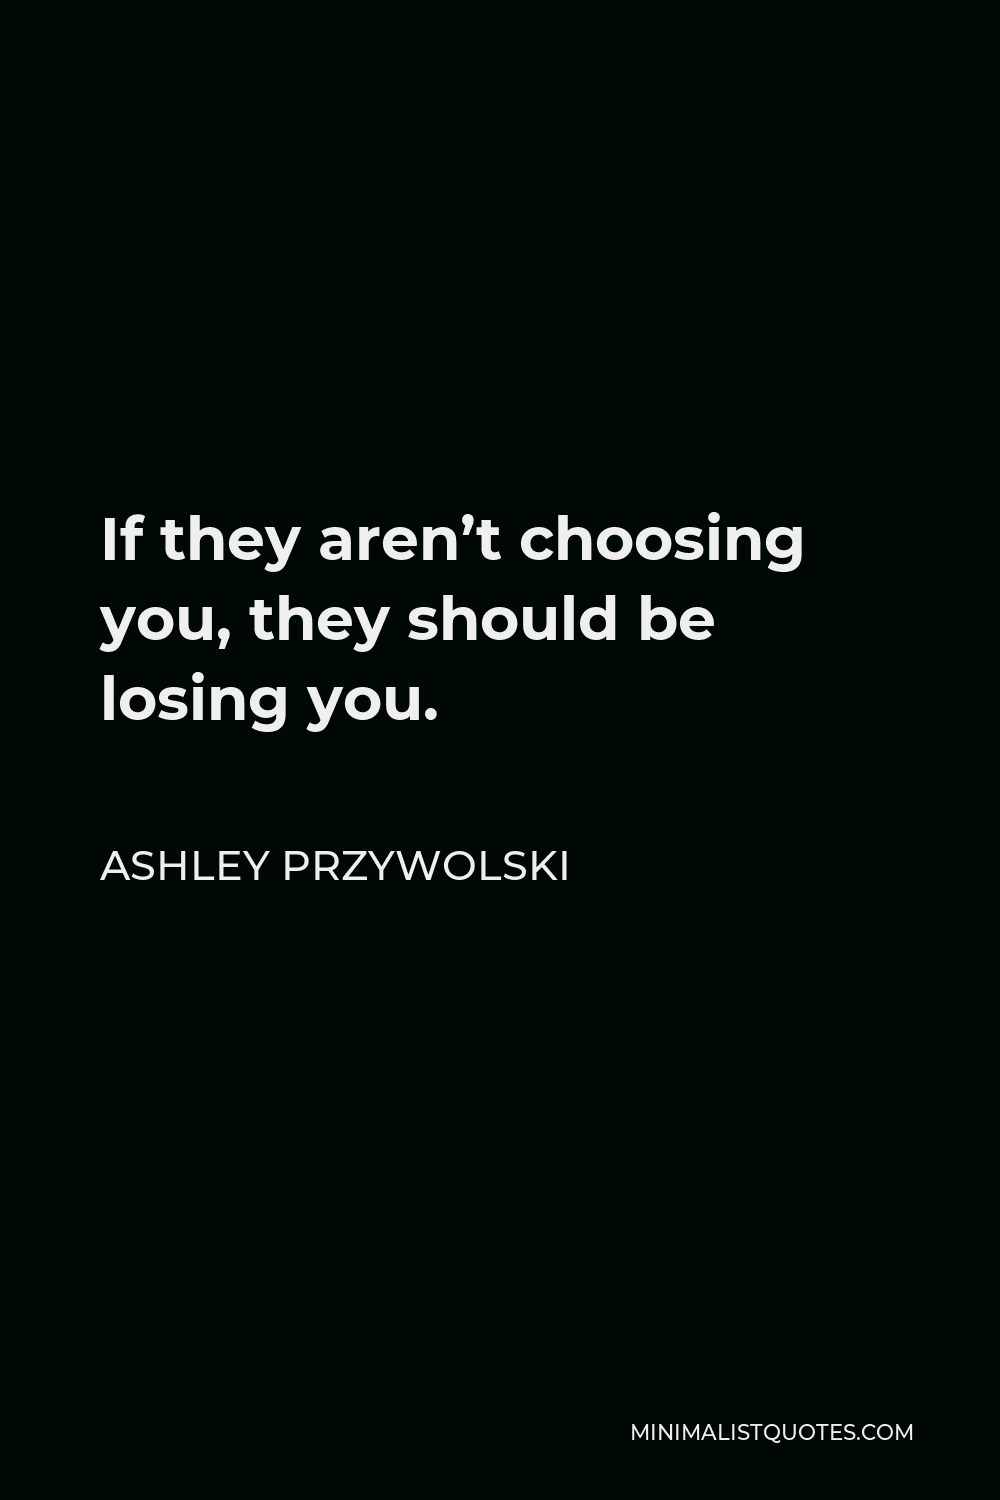 Ashley Przywolski Quote - If they aren’t choosing you, they should be losing you.